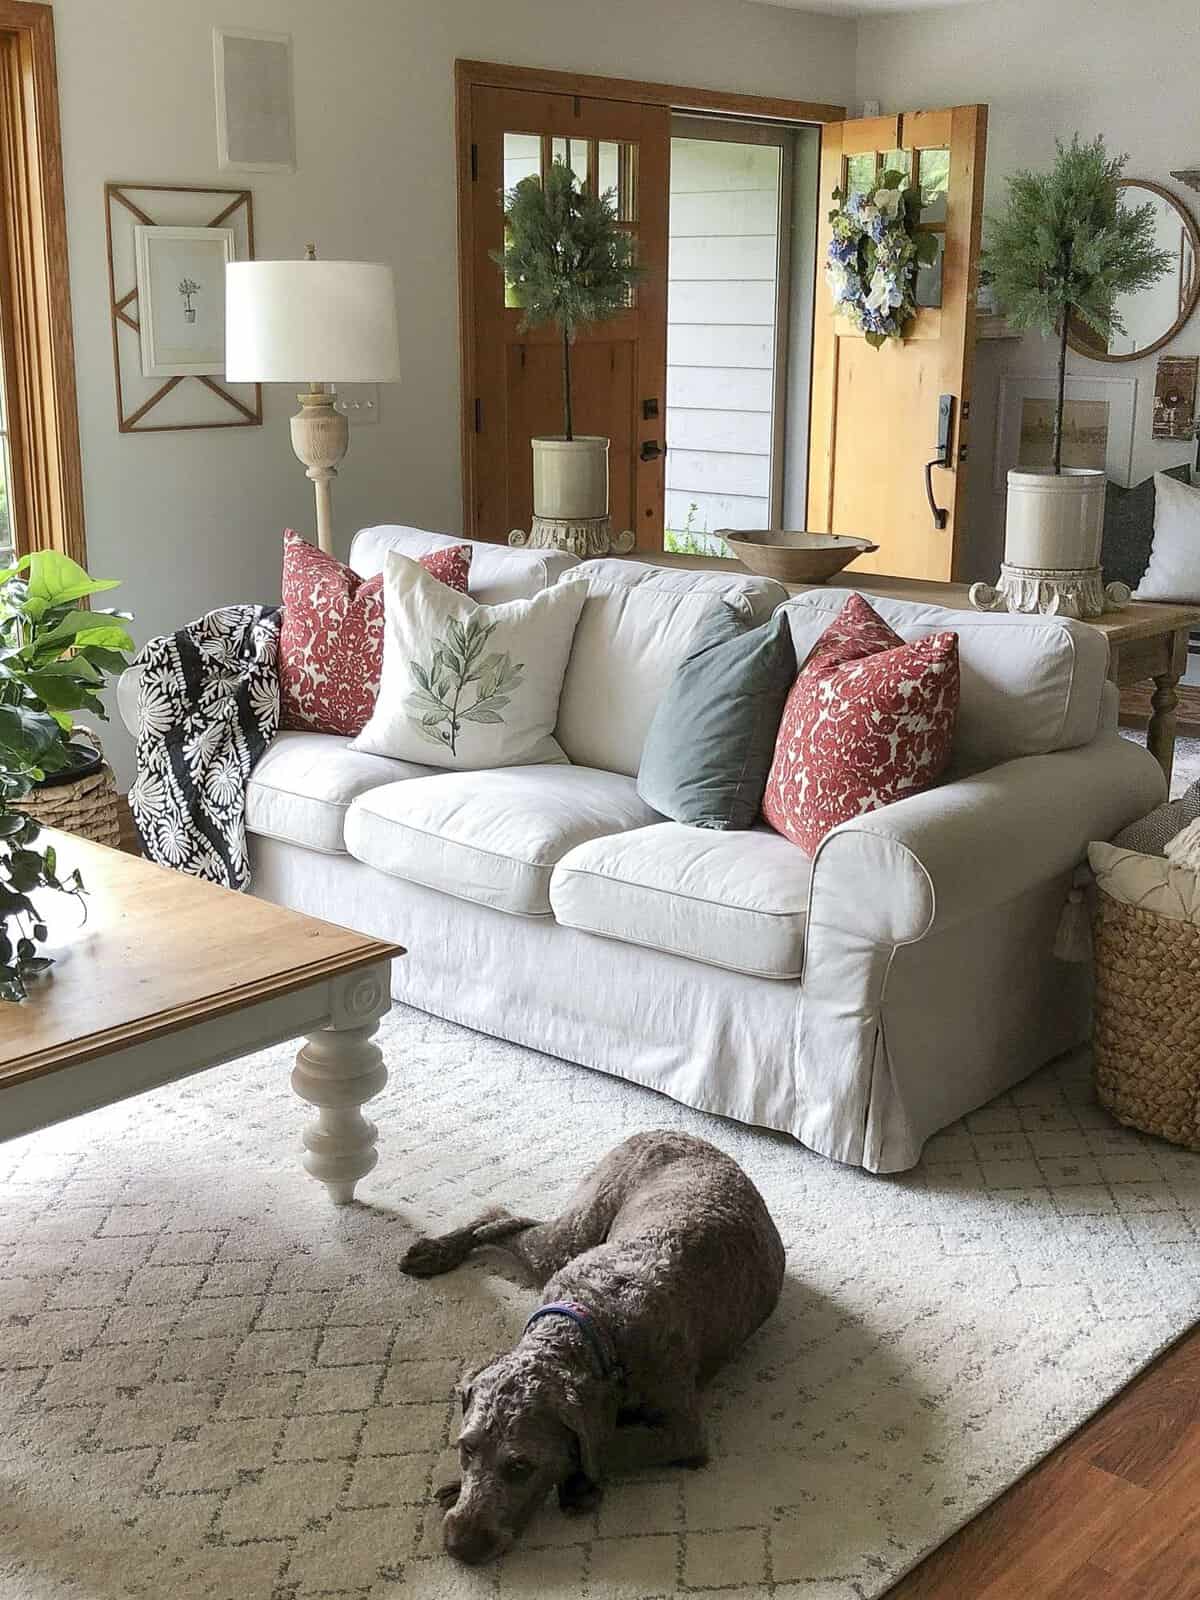 As summer eases into fall I've gathered some beautiful decor that spans the seasons! It's all about transitioning home decor from summer to fall with ease.